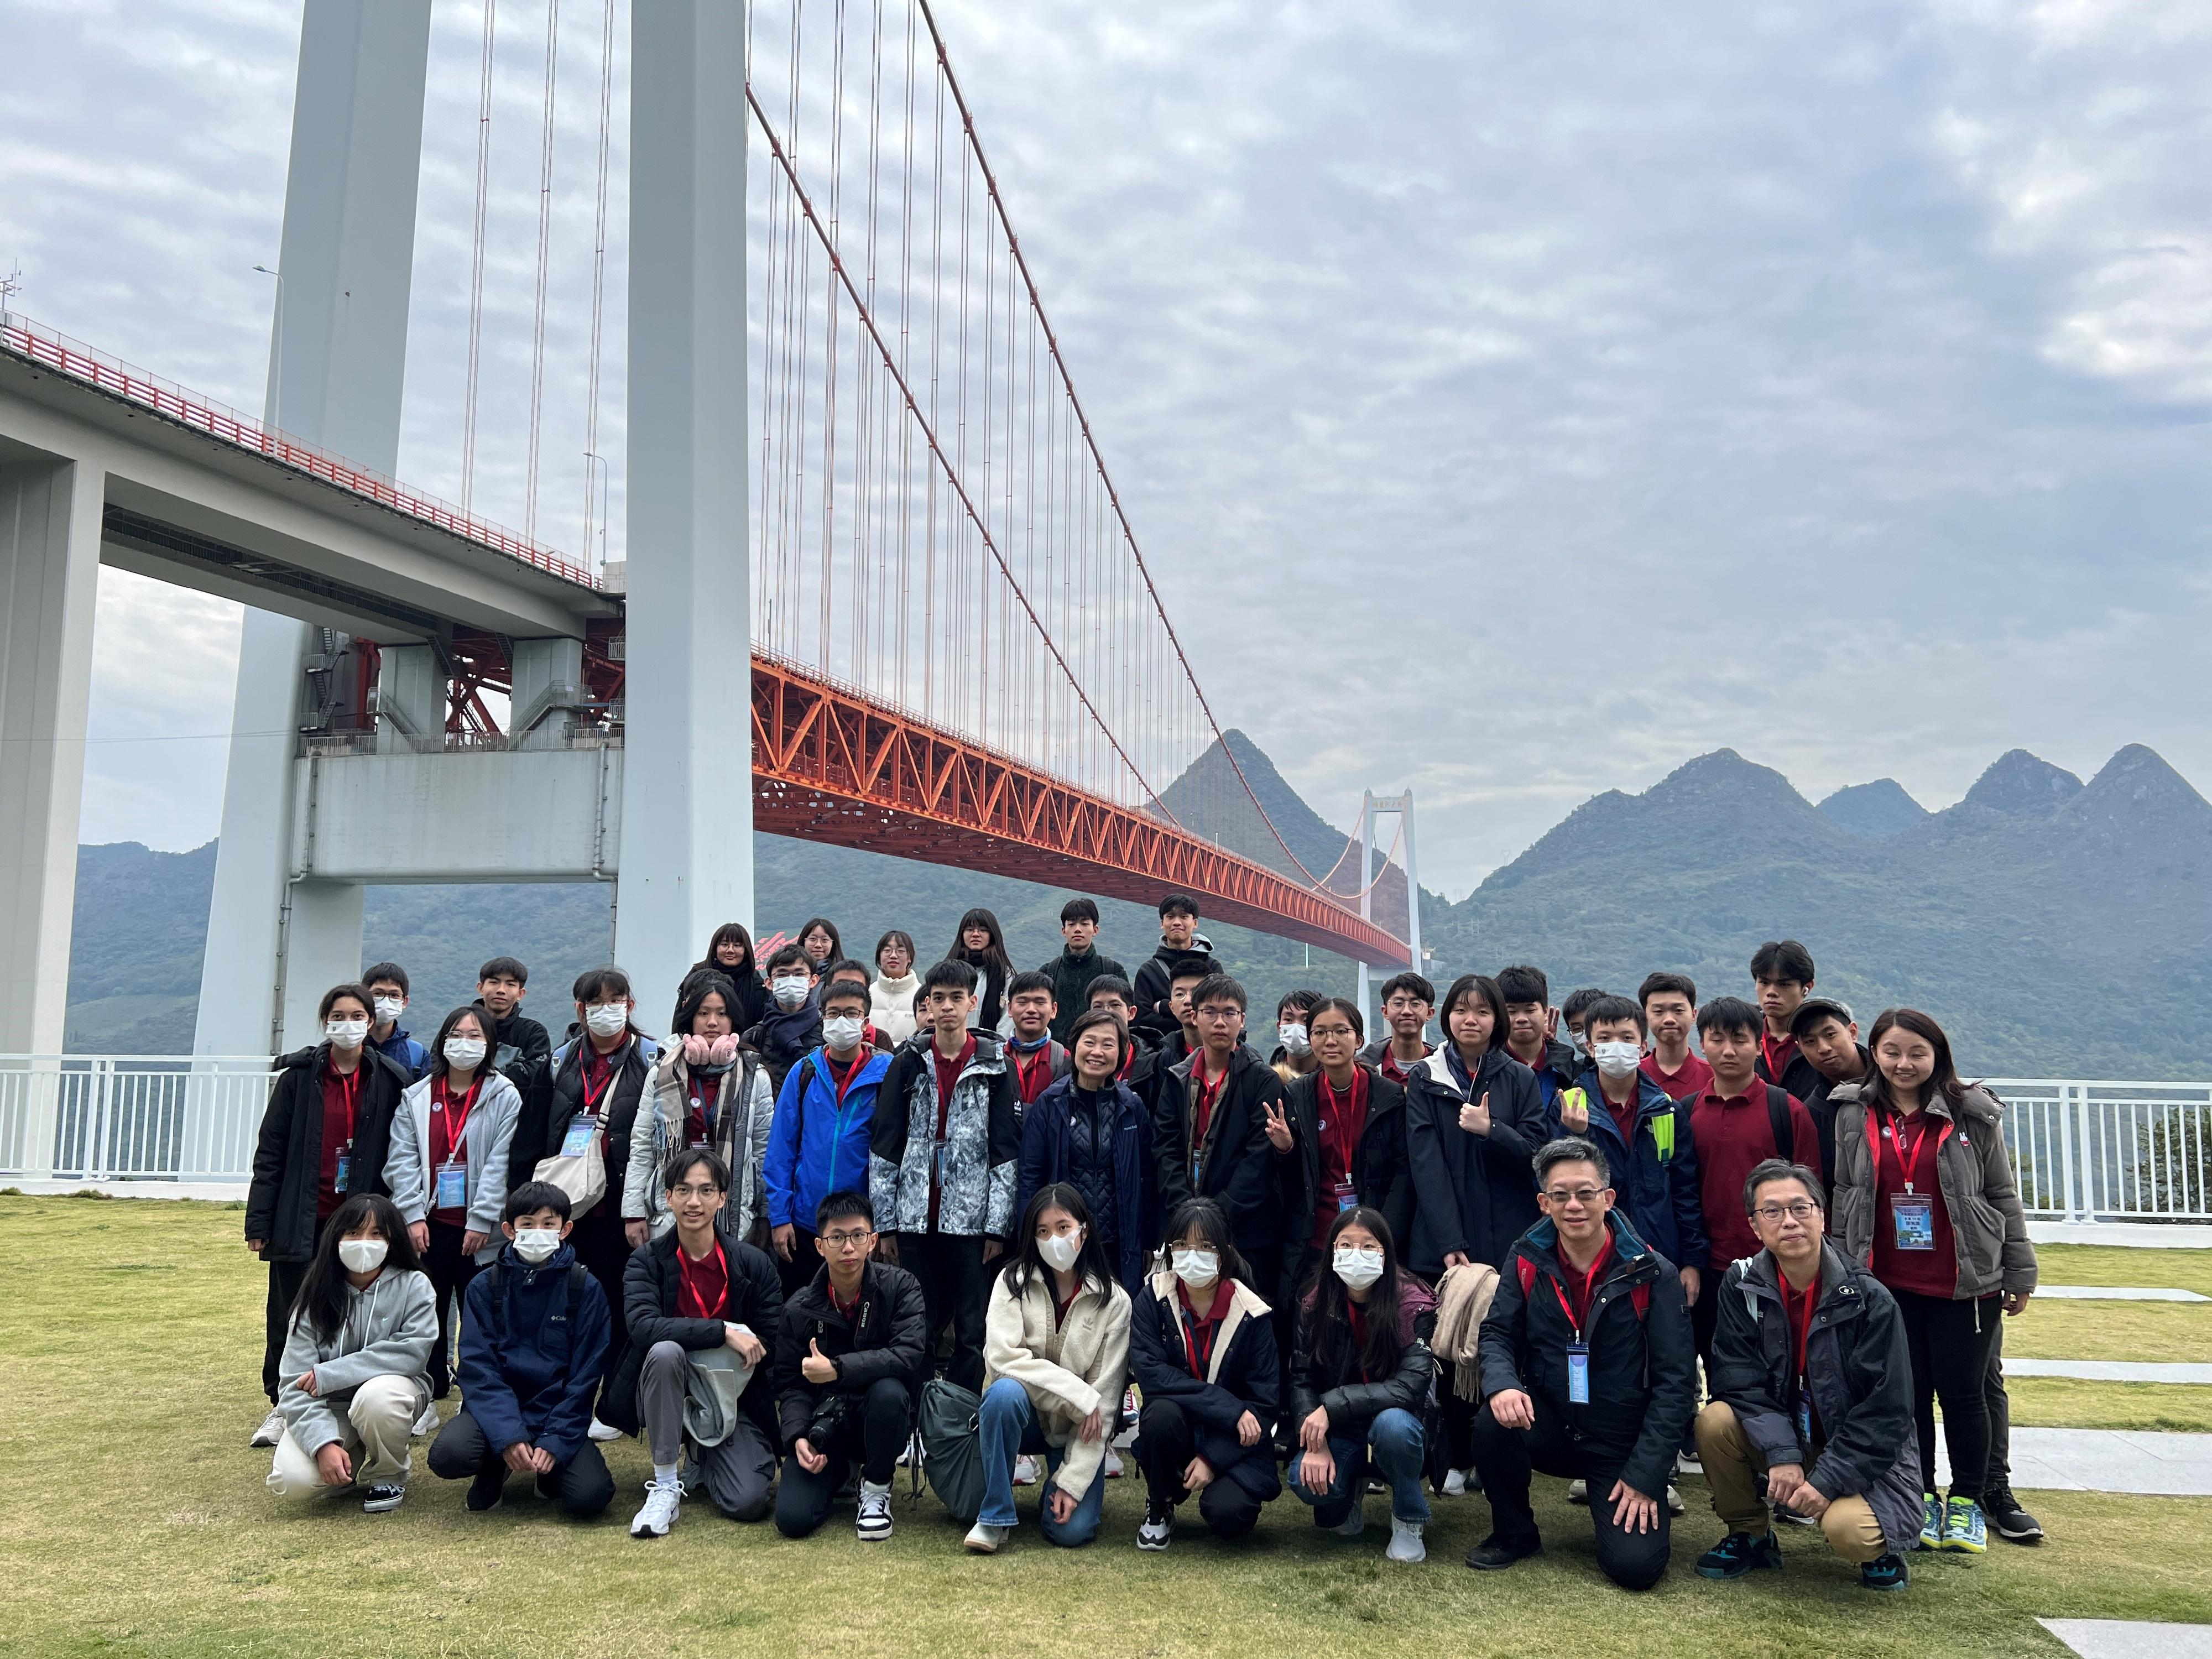 The Secretary for Education, Dr Choi Yuk-lin (second row, centre), together with students and teachers joining the first Mainland study tour outside Guangdong Province of the senior secondary subject of Citizenship and Social Development, visits the Baling River Bridge in Guizhou today (November 17).